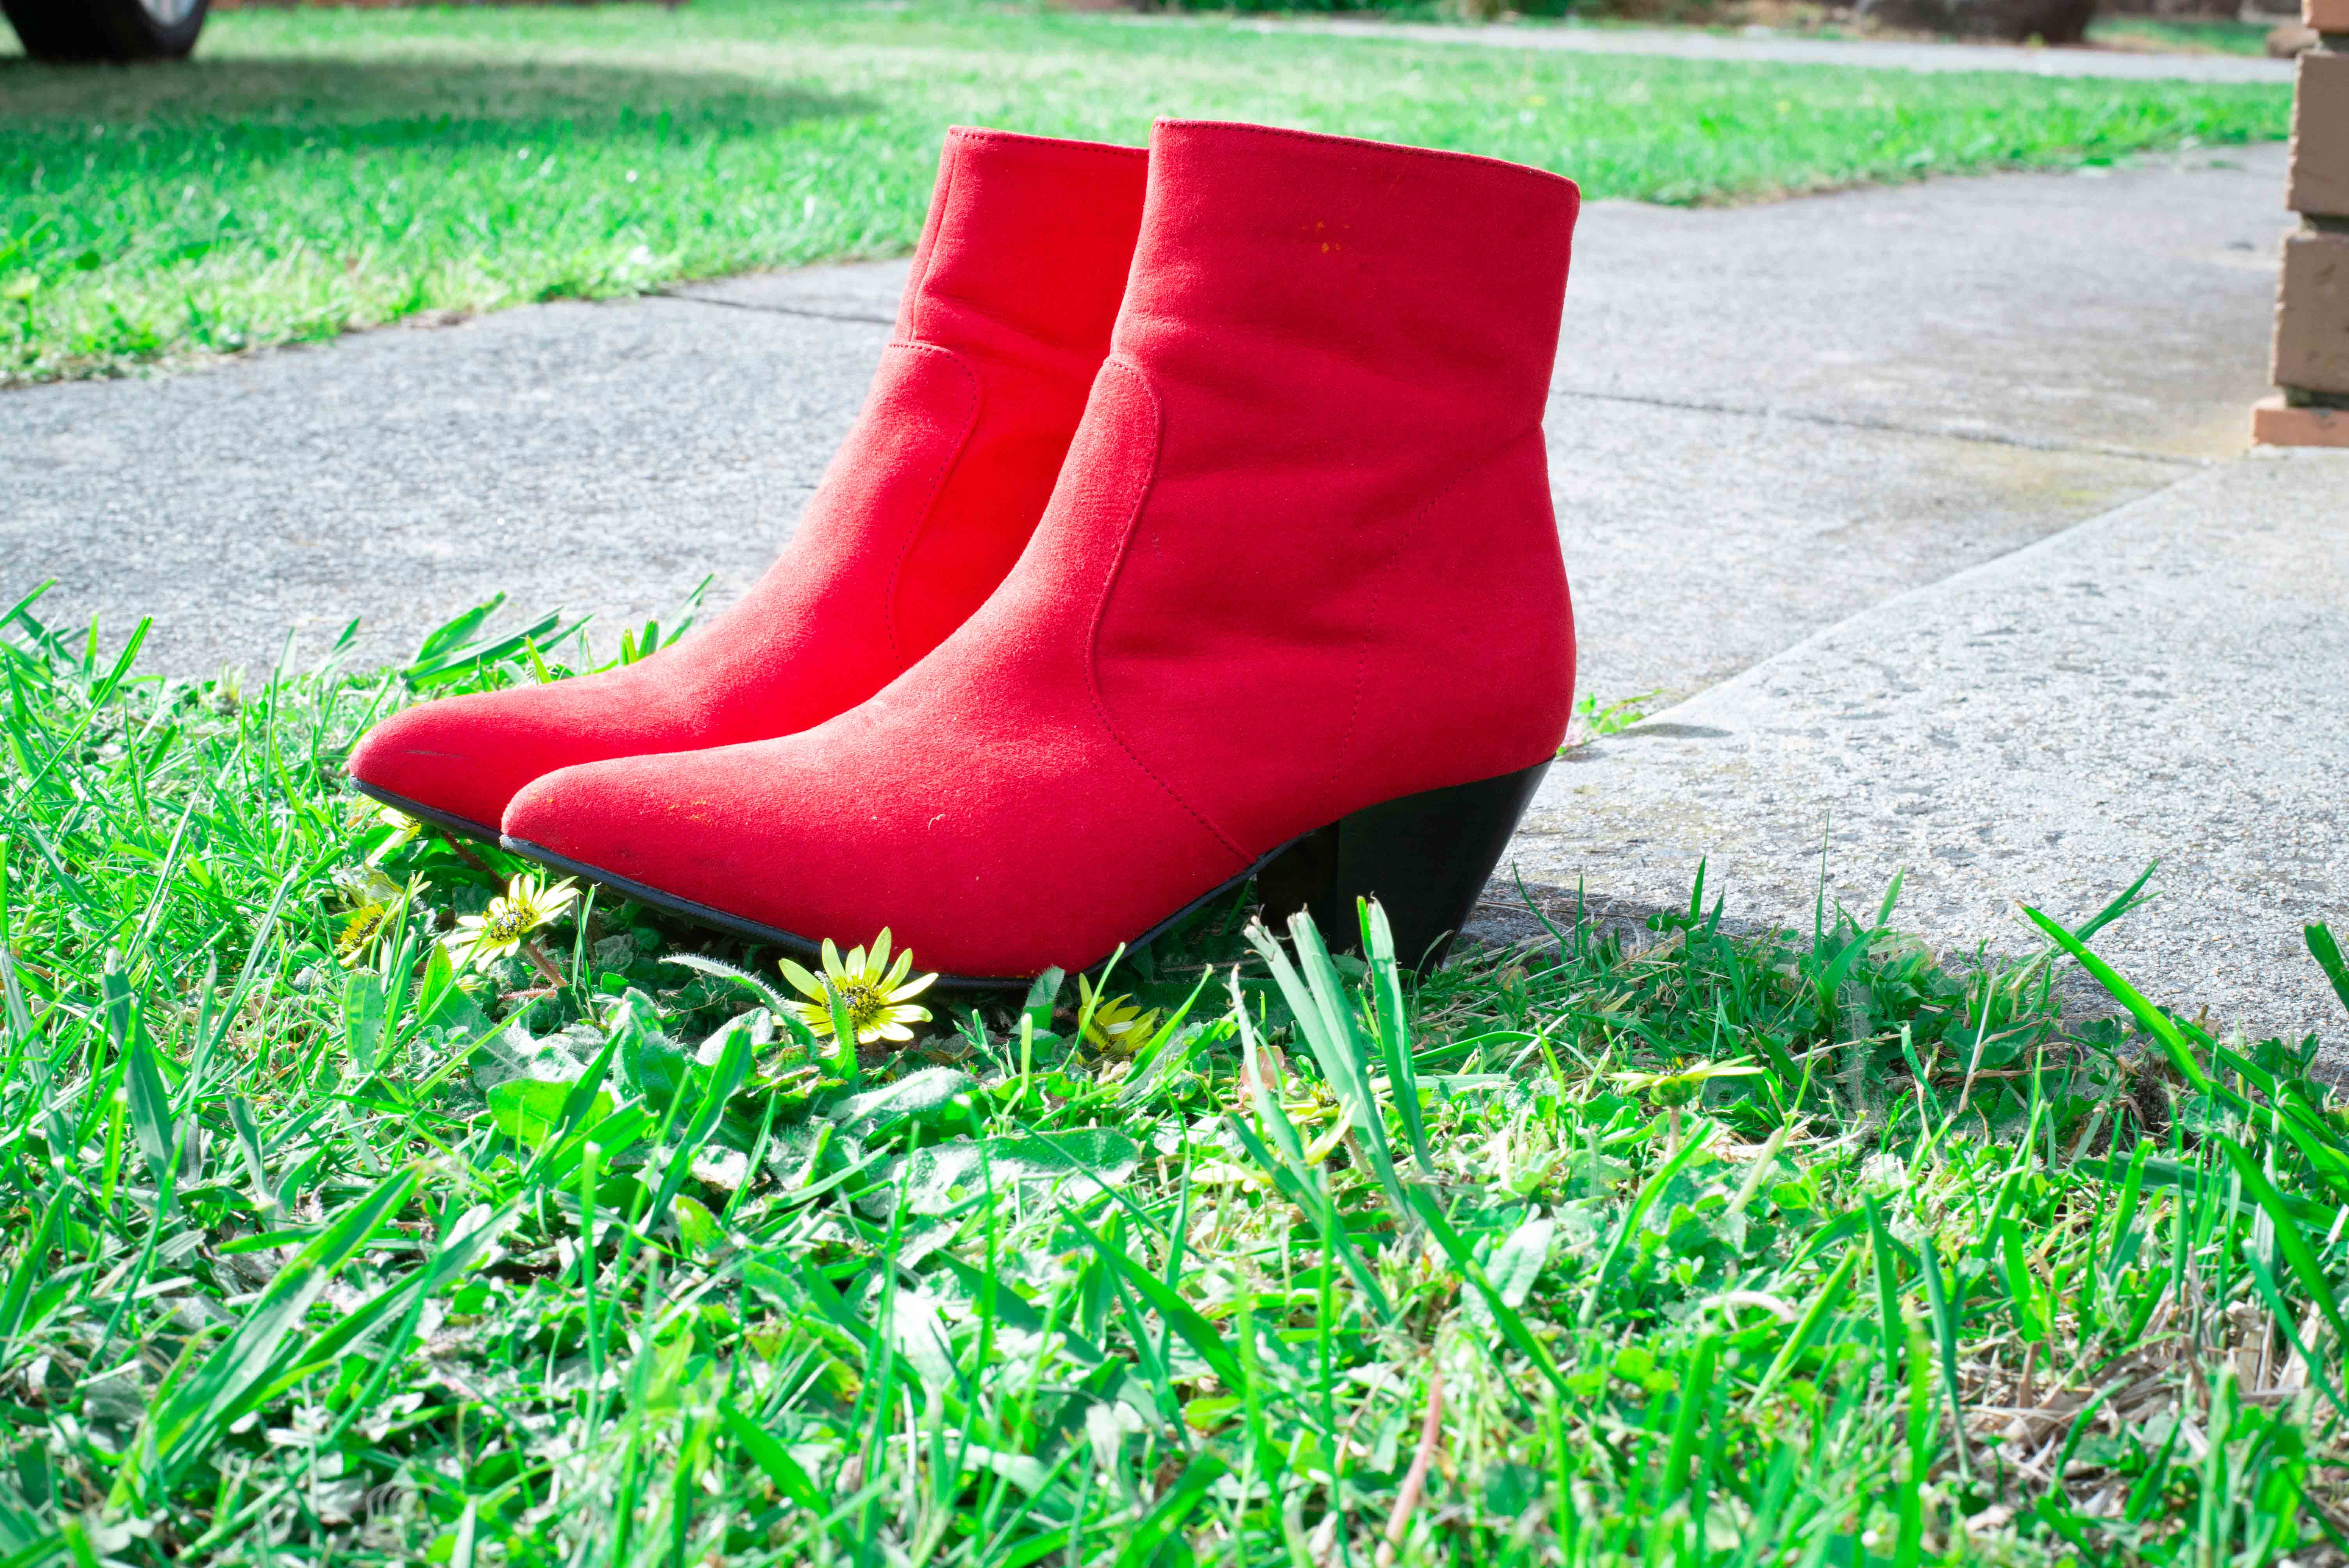 Pair of red boots